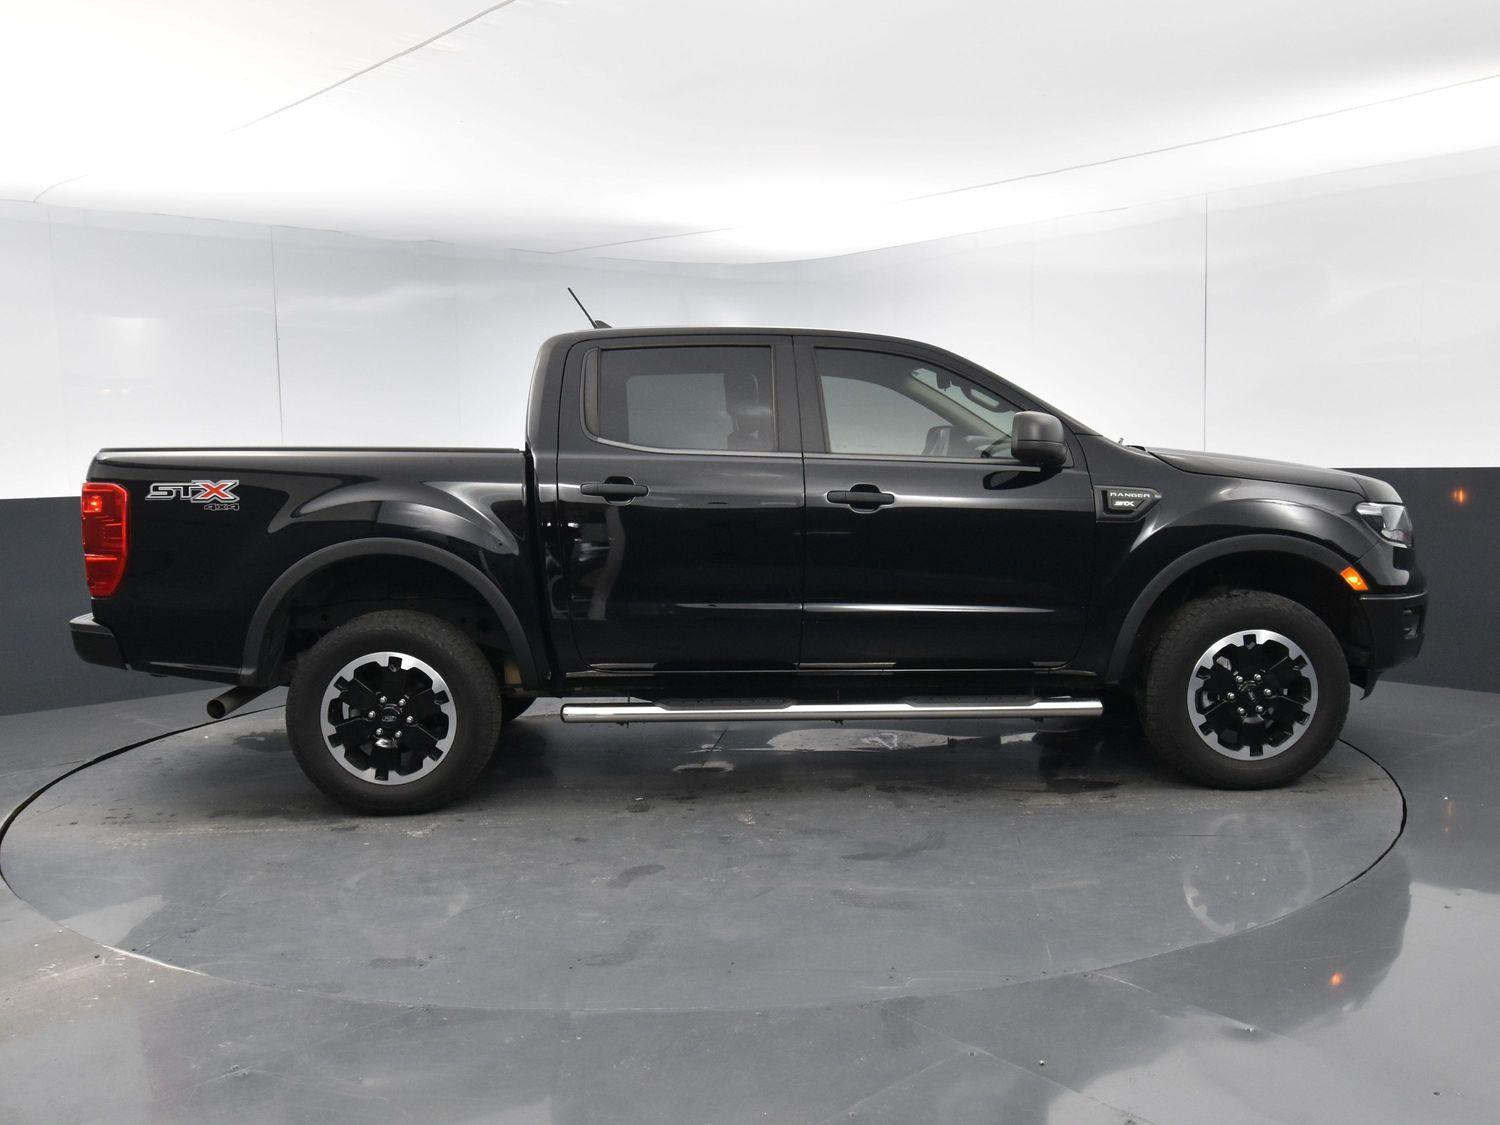 Used 2021 Ford Ranger XL Crew Cab Truck for sale in Grand Island NE